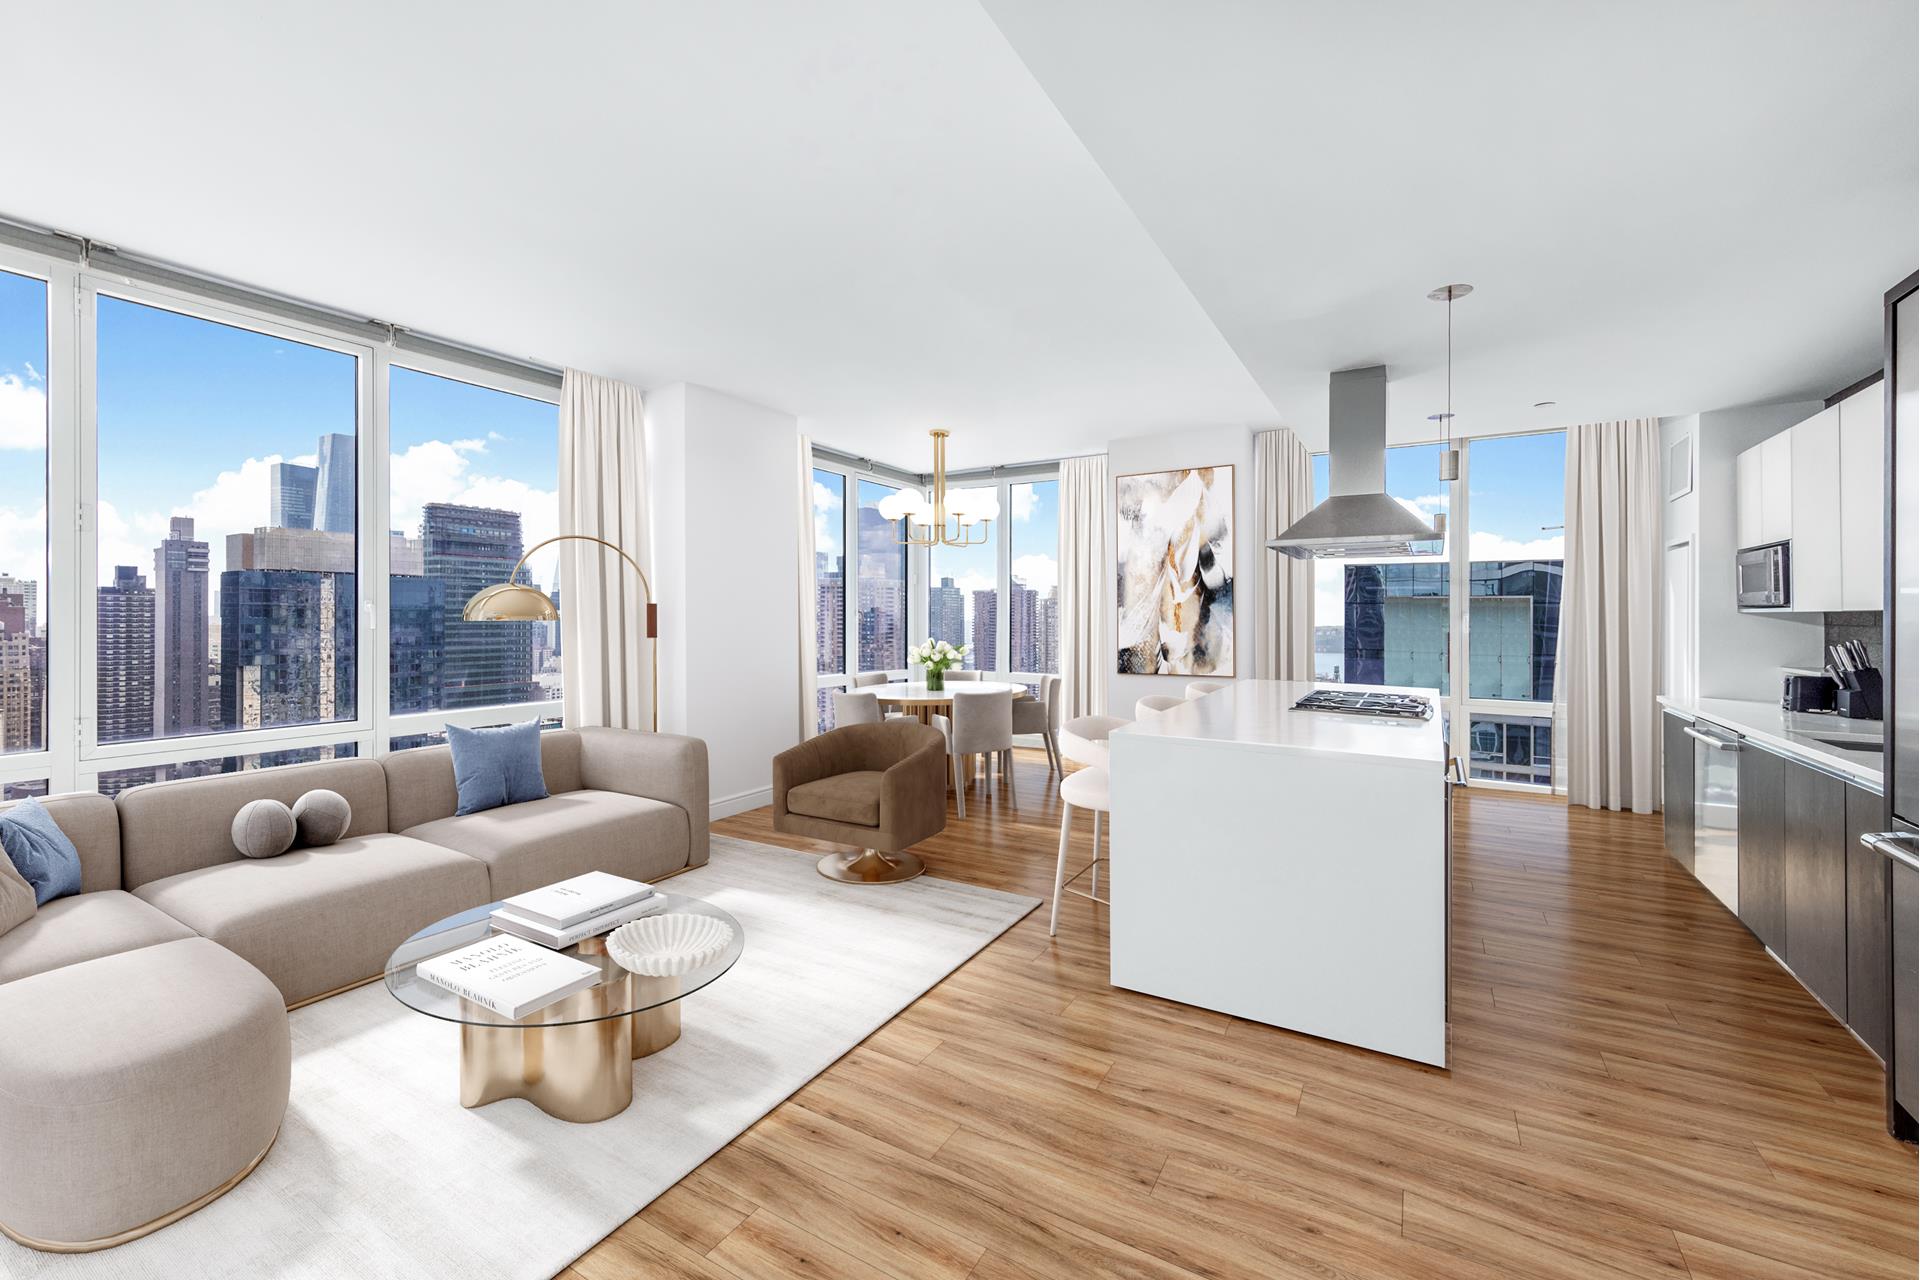 247 West 46th Street 3103, Chelsea And Clinton, Downtown, NYC - 2 Bedrooms  
2.5 Bathrooms  
4 Rooms - 